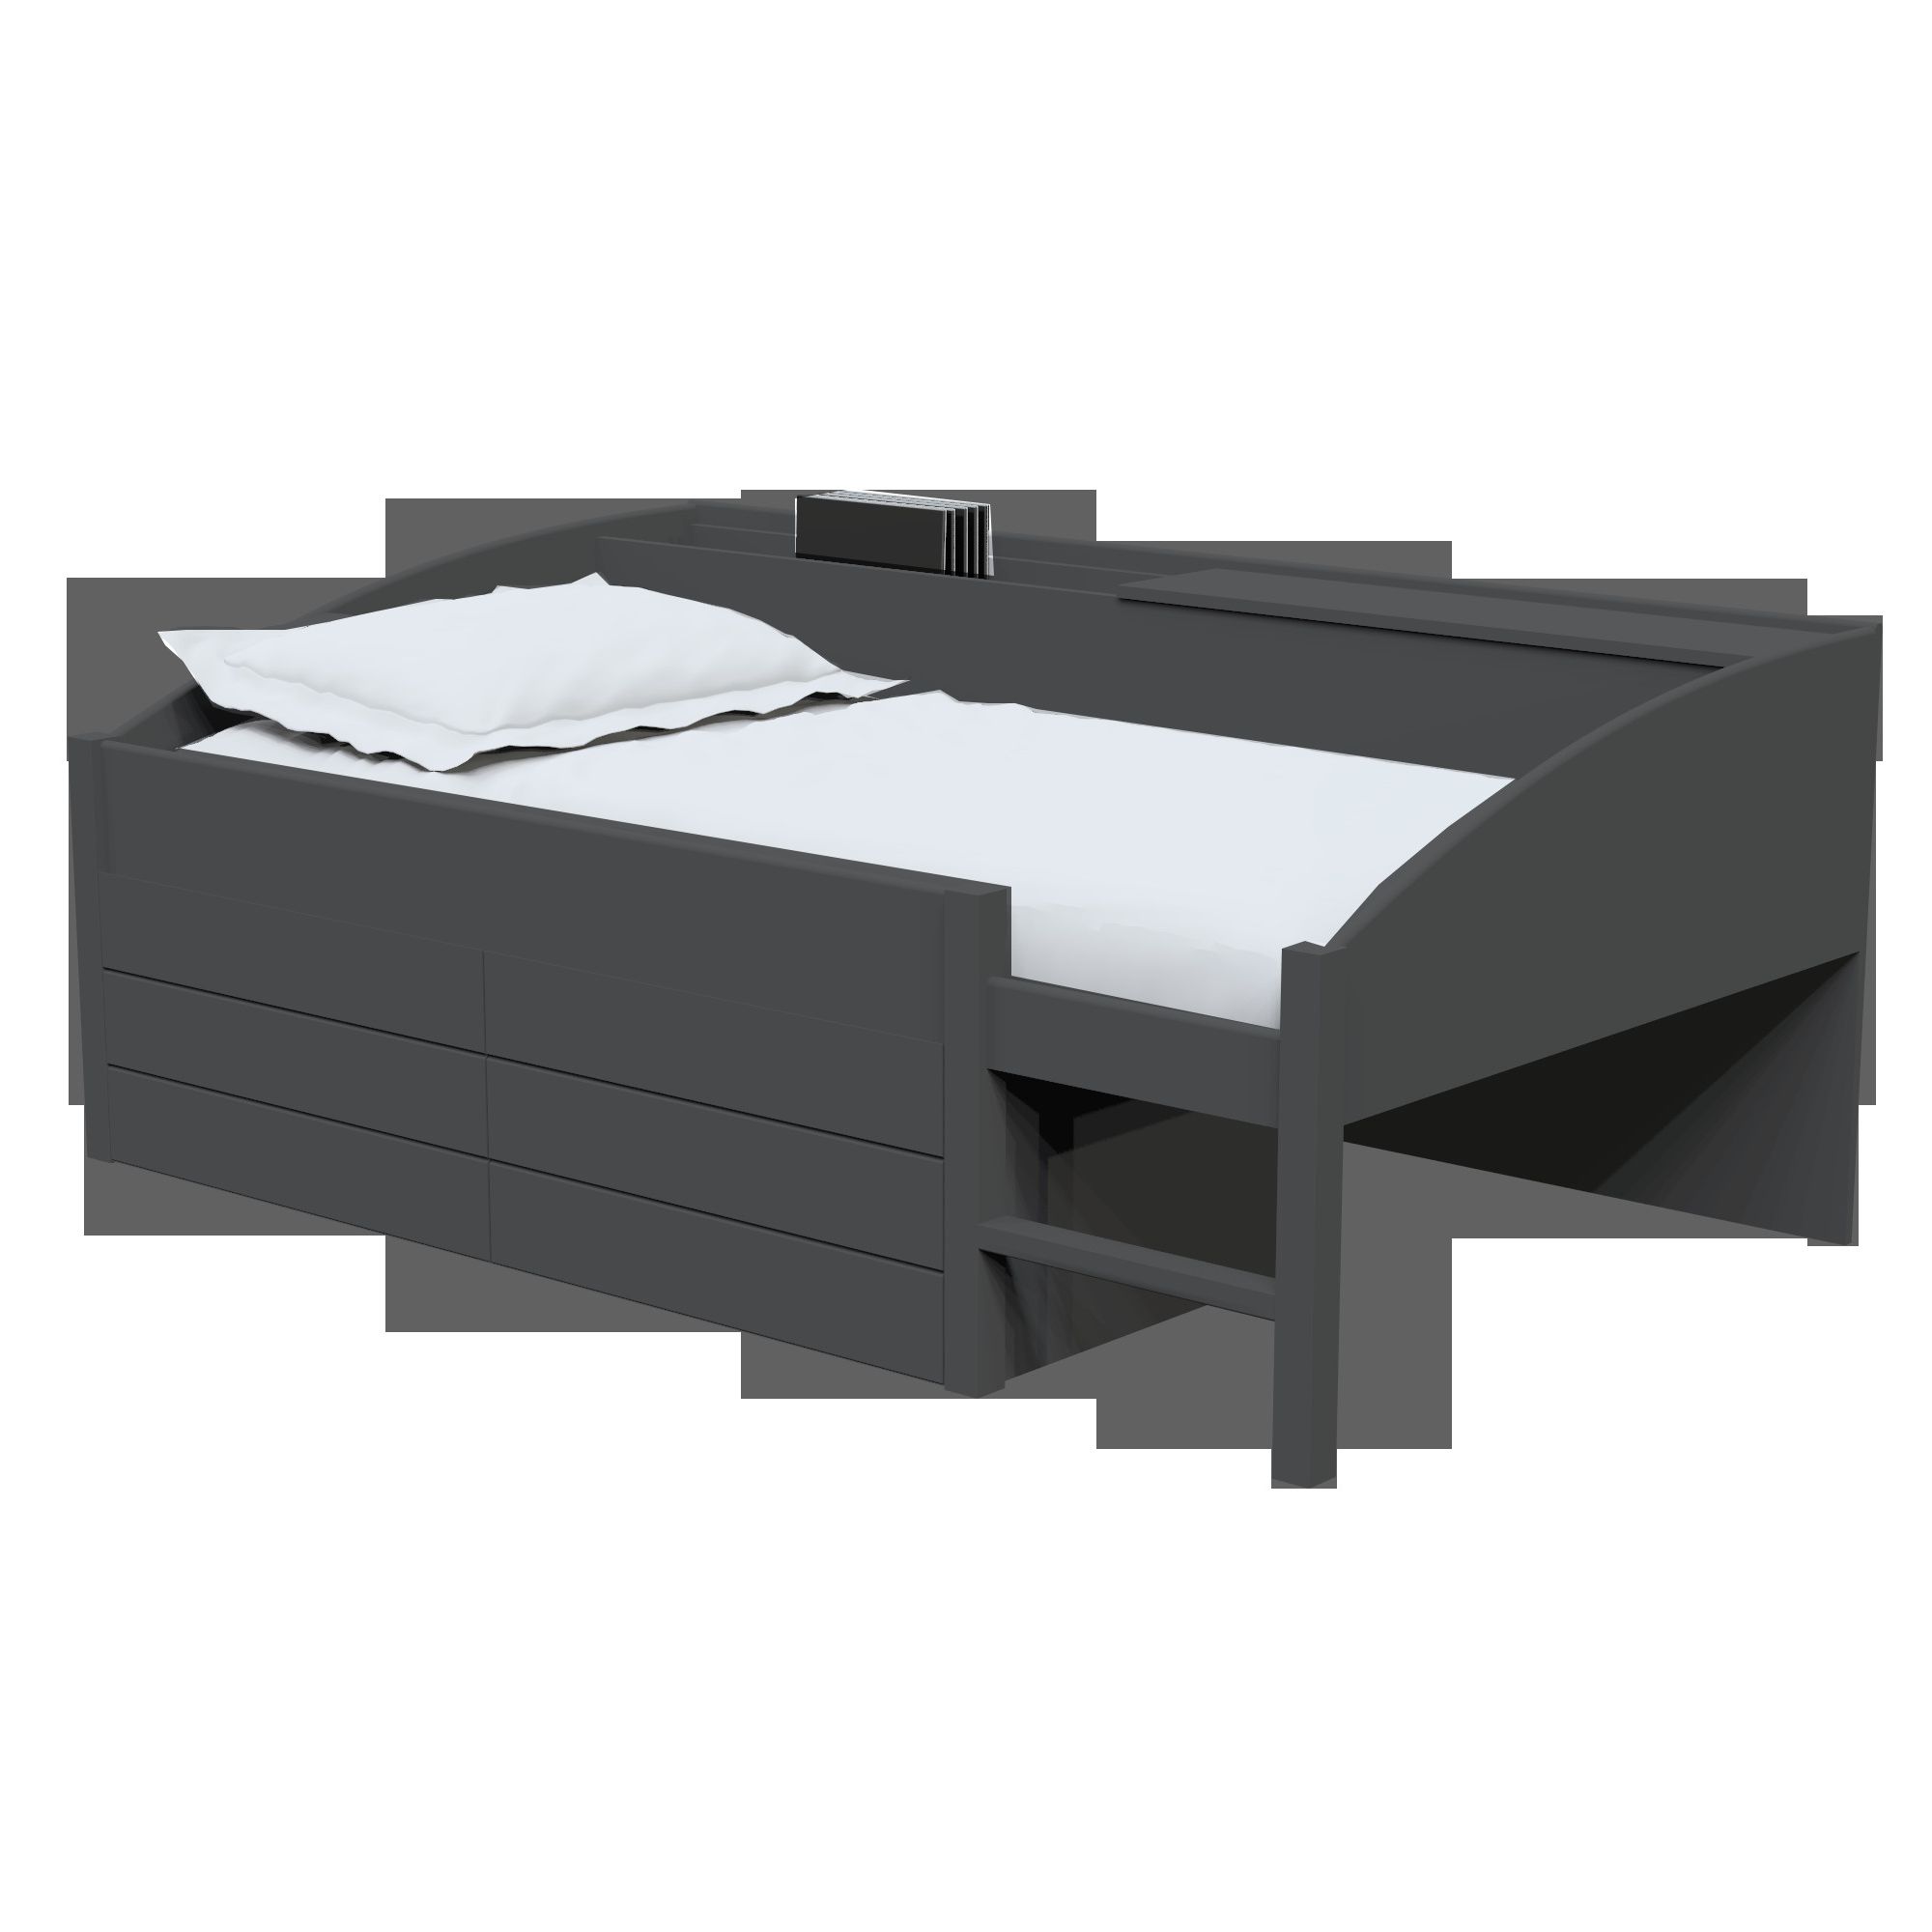 Altruna Moove Bed with Two Drawers - Dark Grey at Tesco Direct